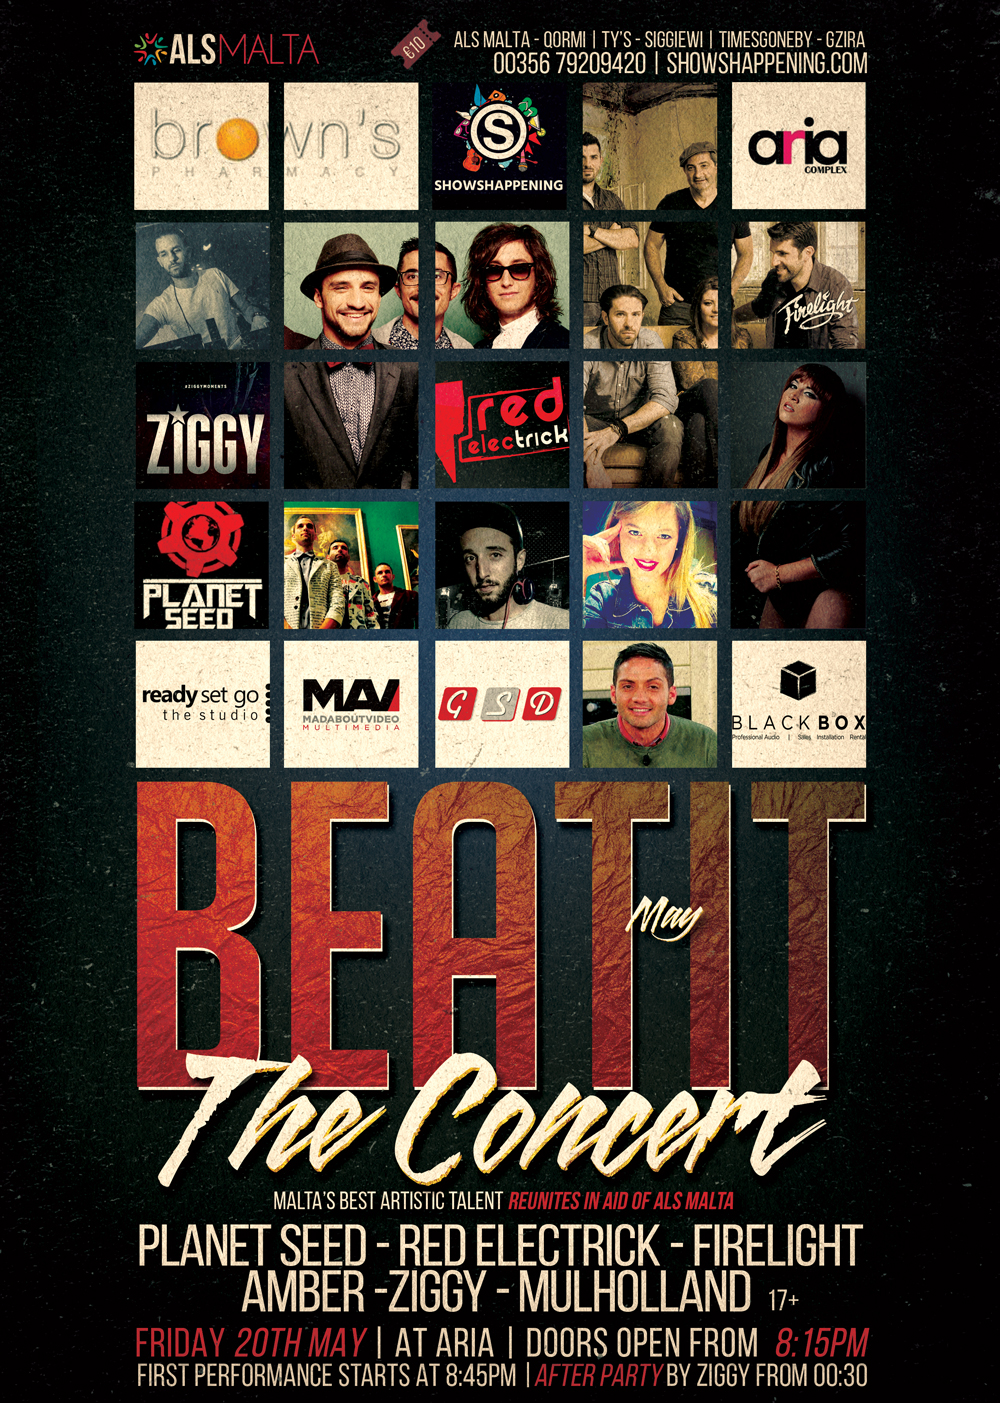 BEAT IT MAY ALS - The Concert poster